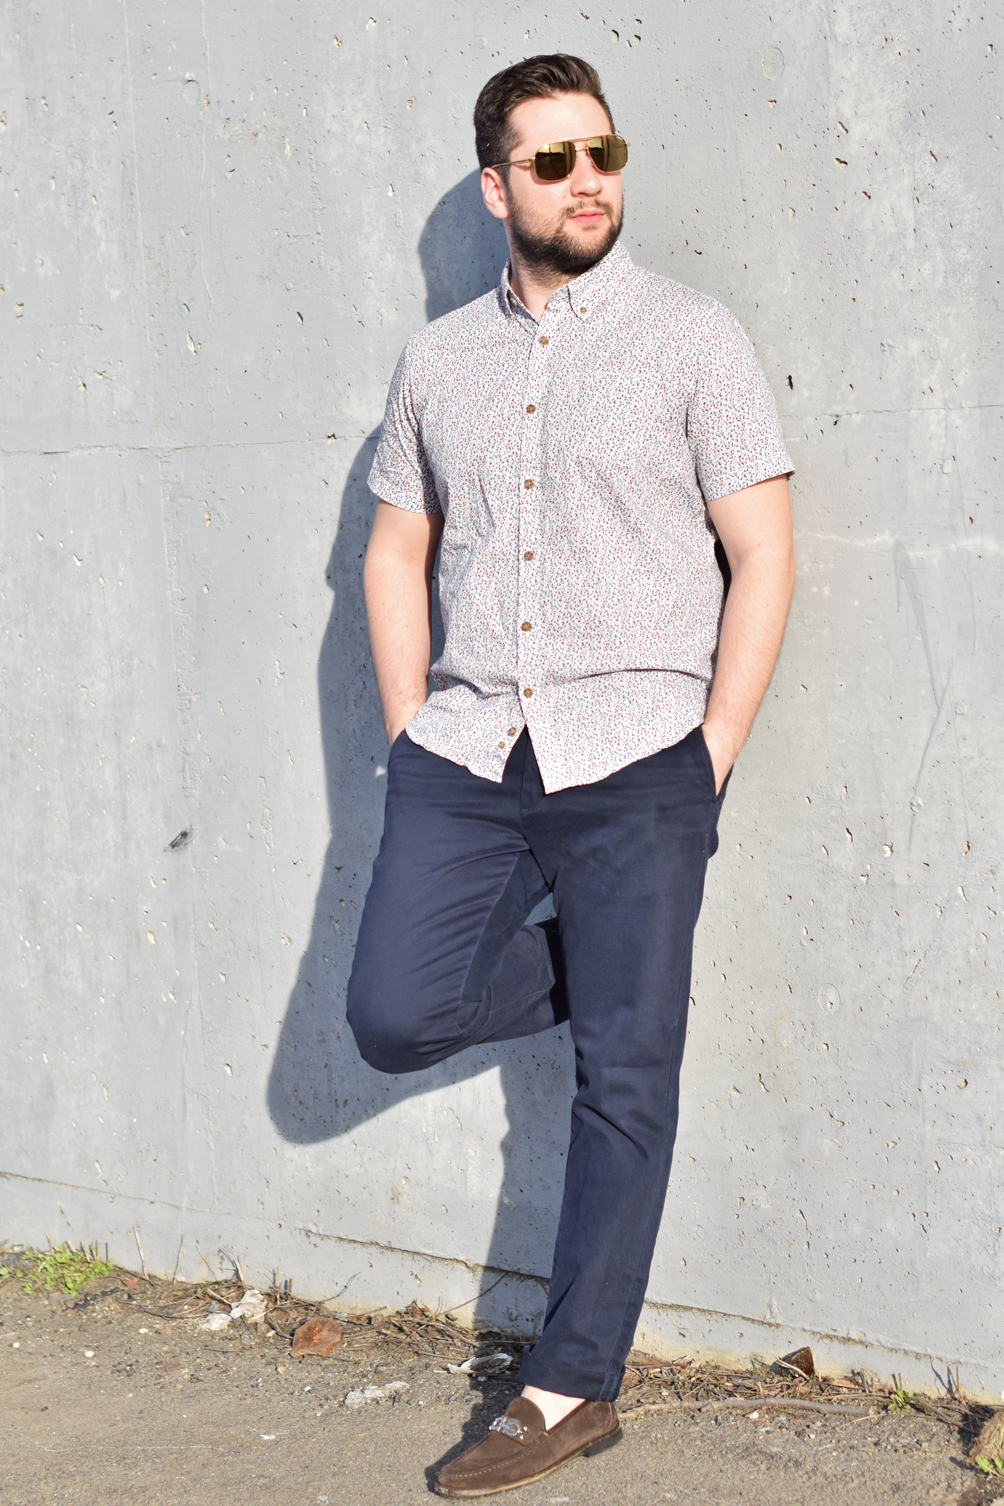 men's spring outfit with cuffed trousers and a floral pattern shirt - one brass fox